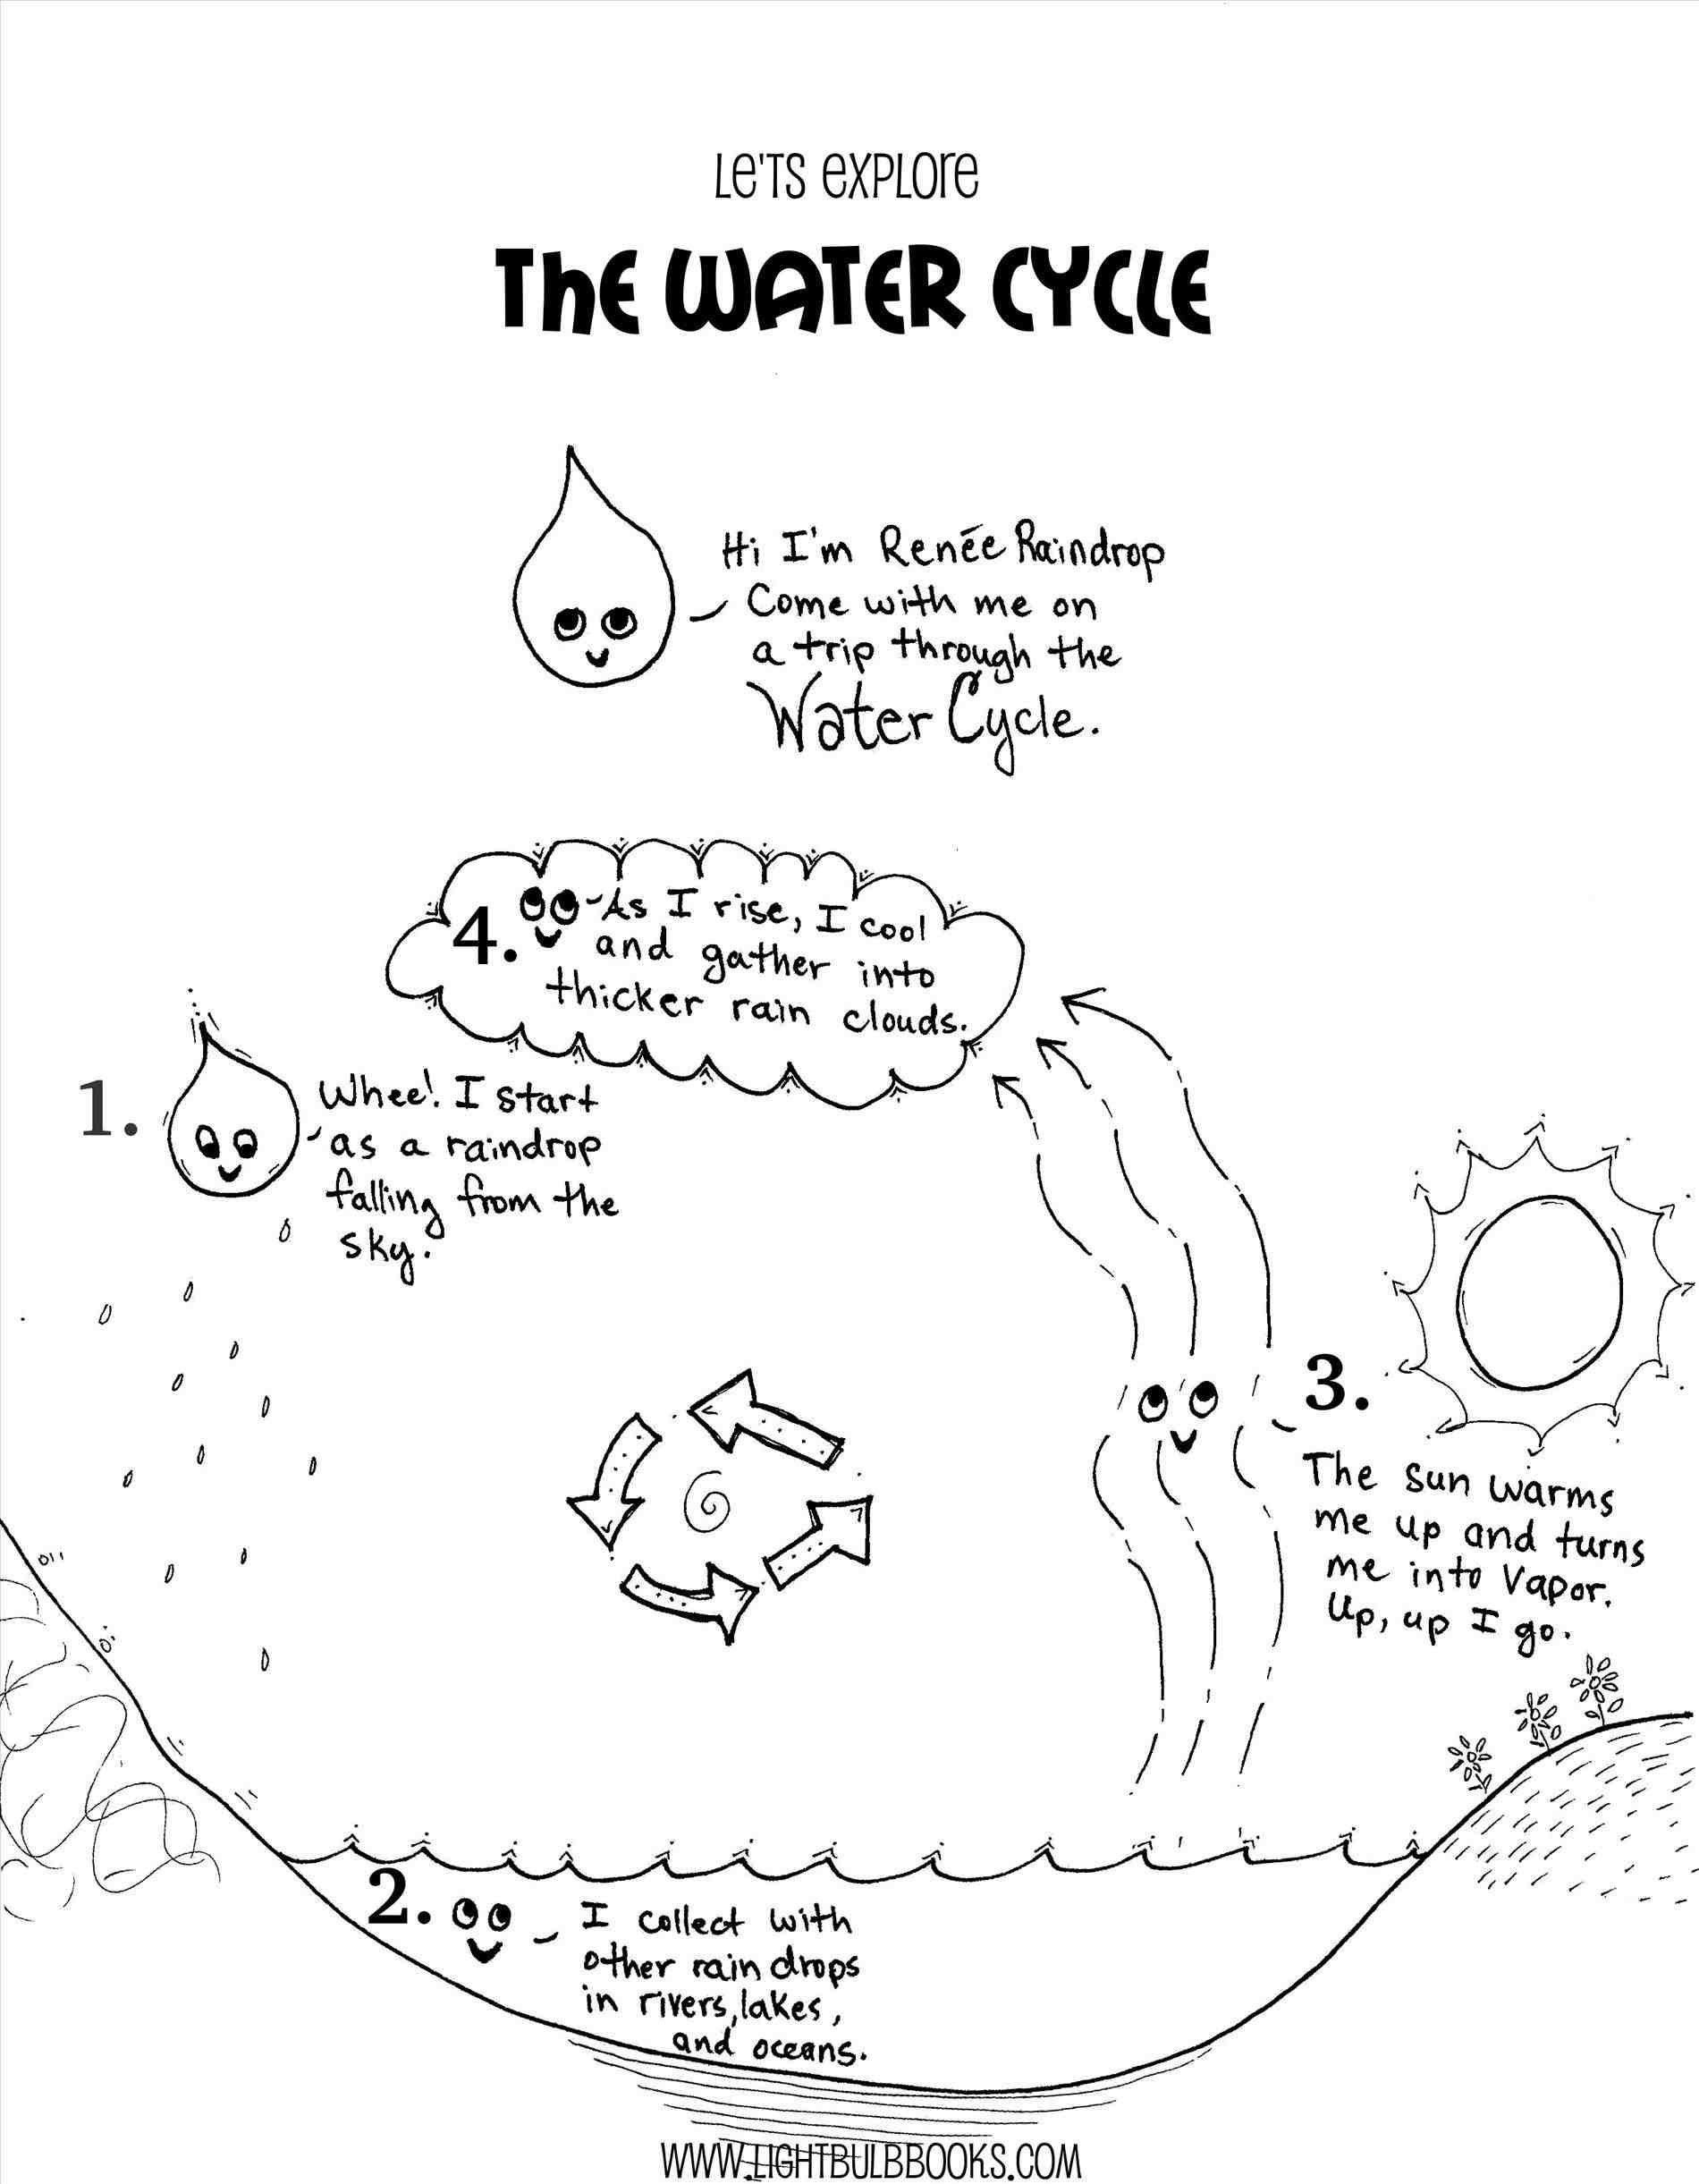 Cycles Worksheet Answer Key the Water Cycle Worksheet Answer Key and Water Cycle